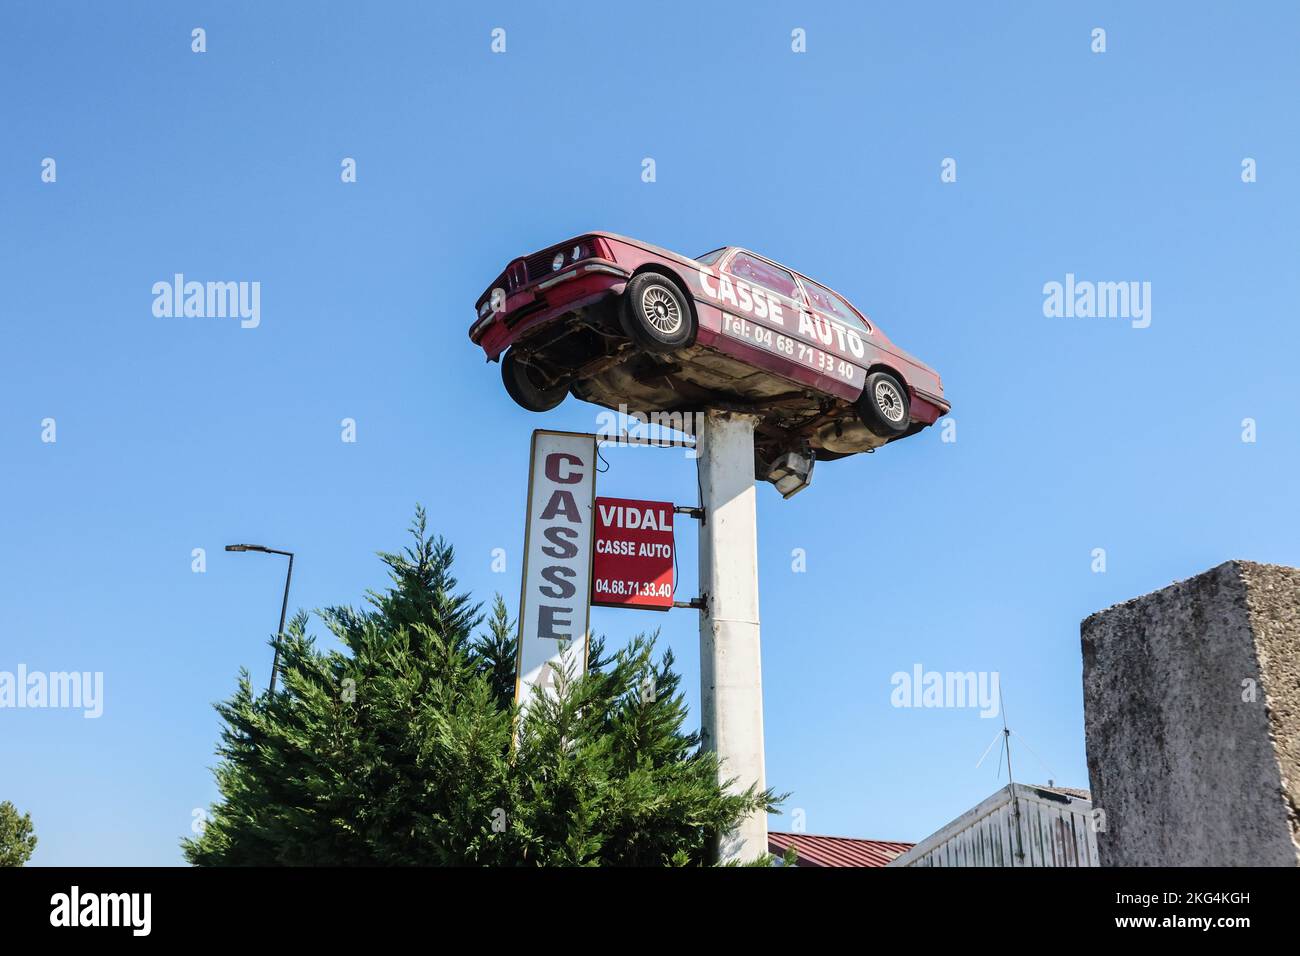 Life size,old,car,used,to,advertise,ad,advertisement,for,a,Car,Auto  shop,in,at,Carcassonne,Aude,Occitanie,south of  France,France,French,Europe,European,August,summer Stock Photo - Alamy